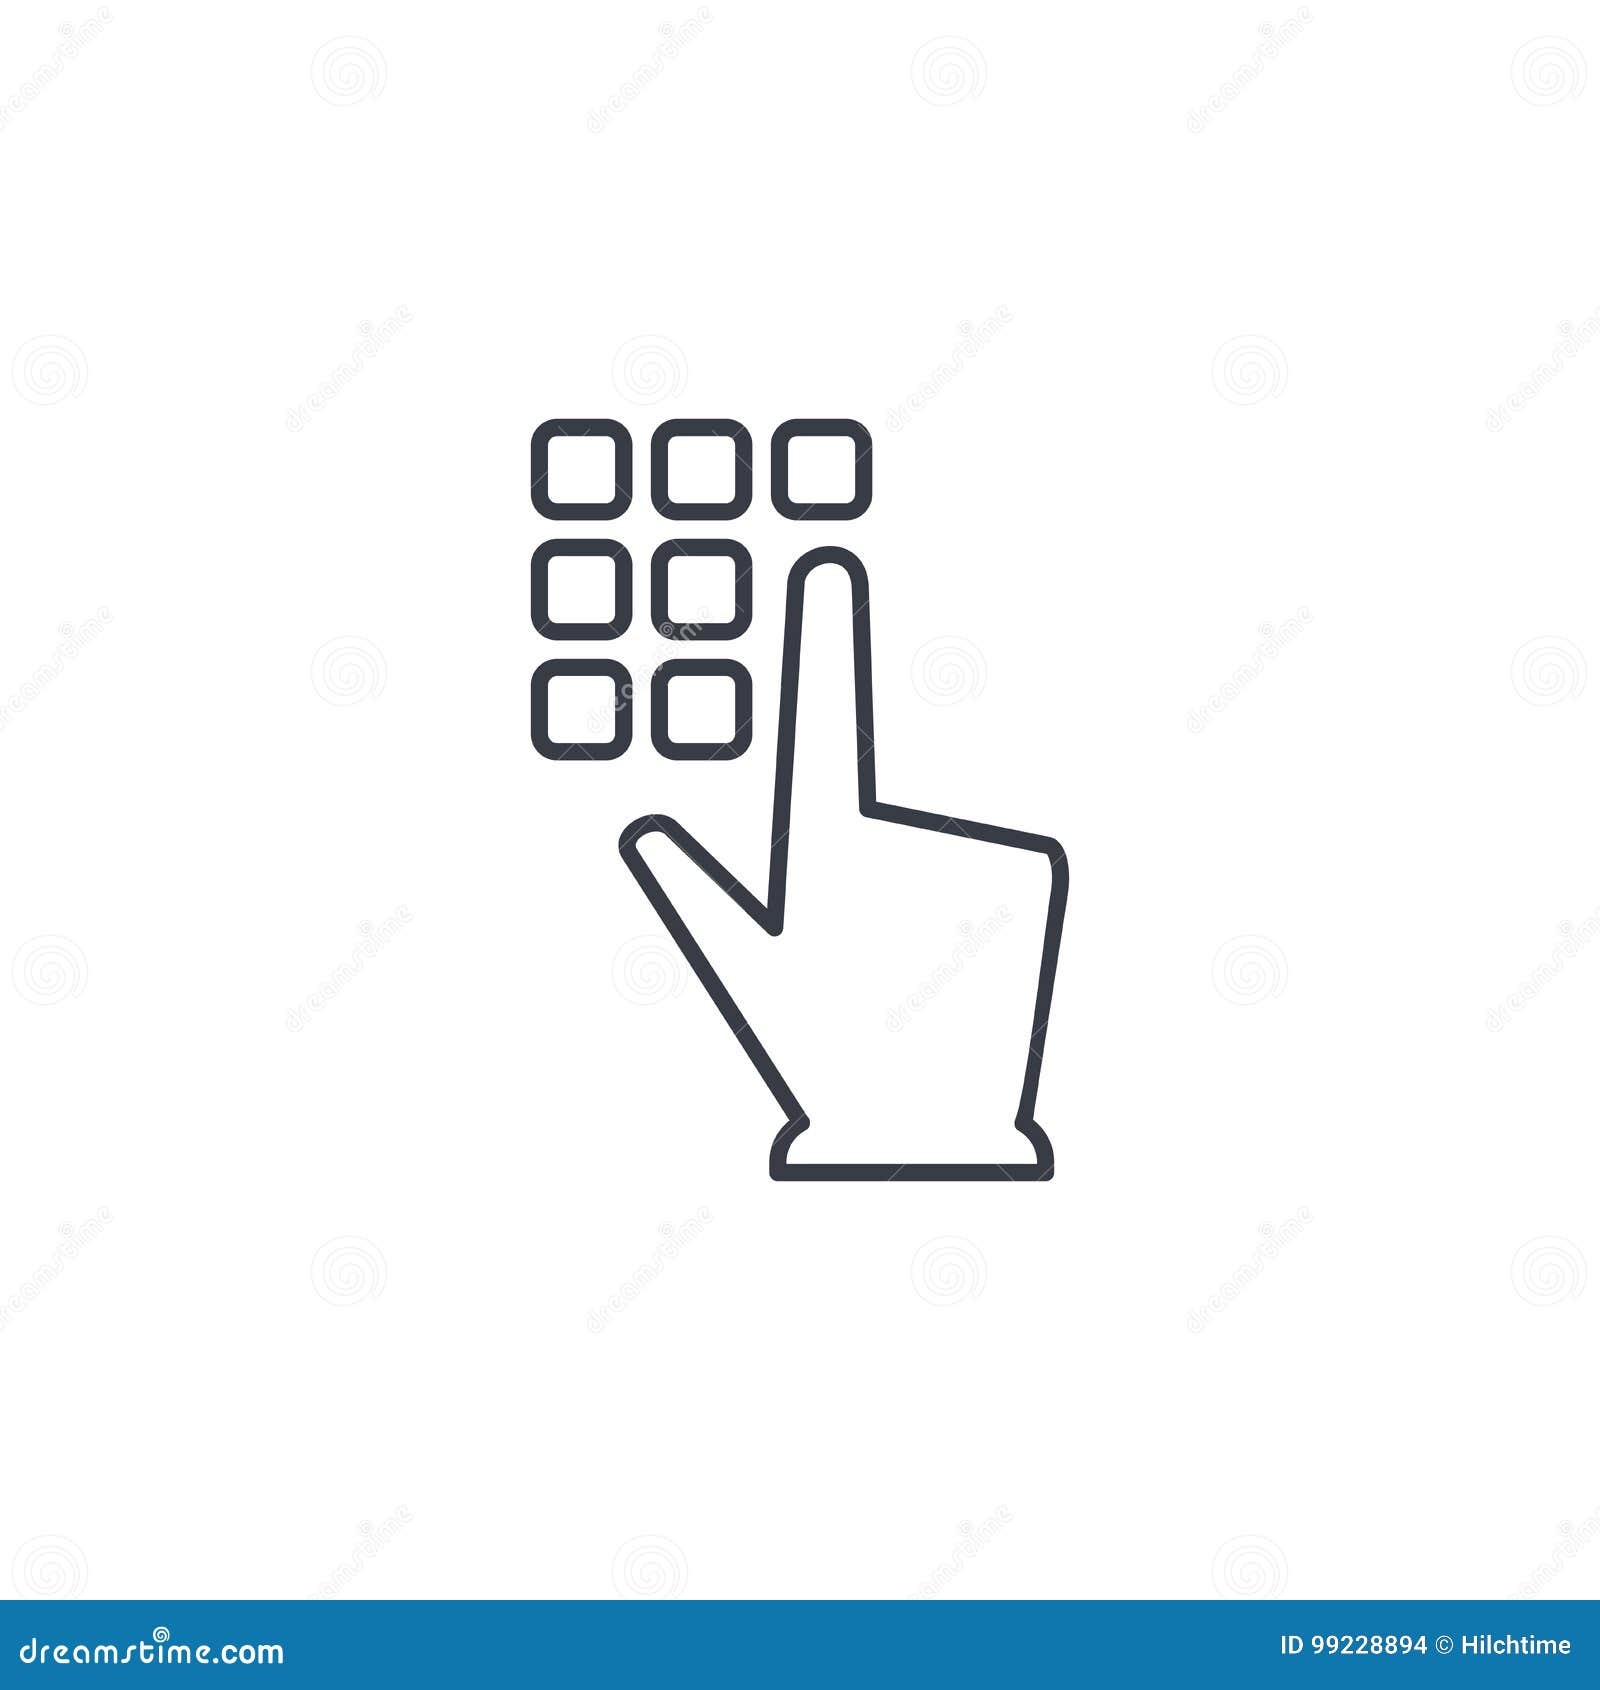 pin code keypad, access security lock, hand pushing thin line icon. linear  